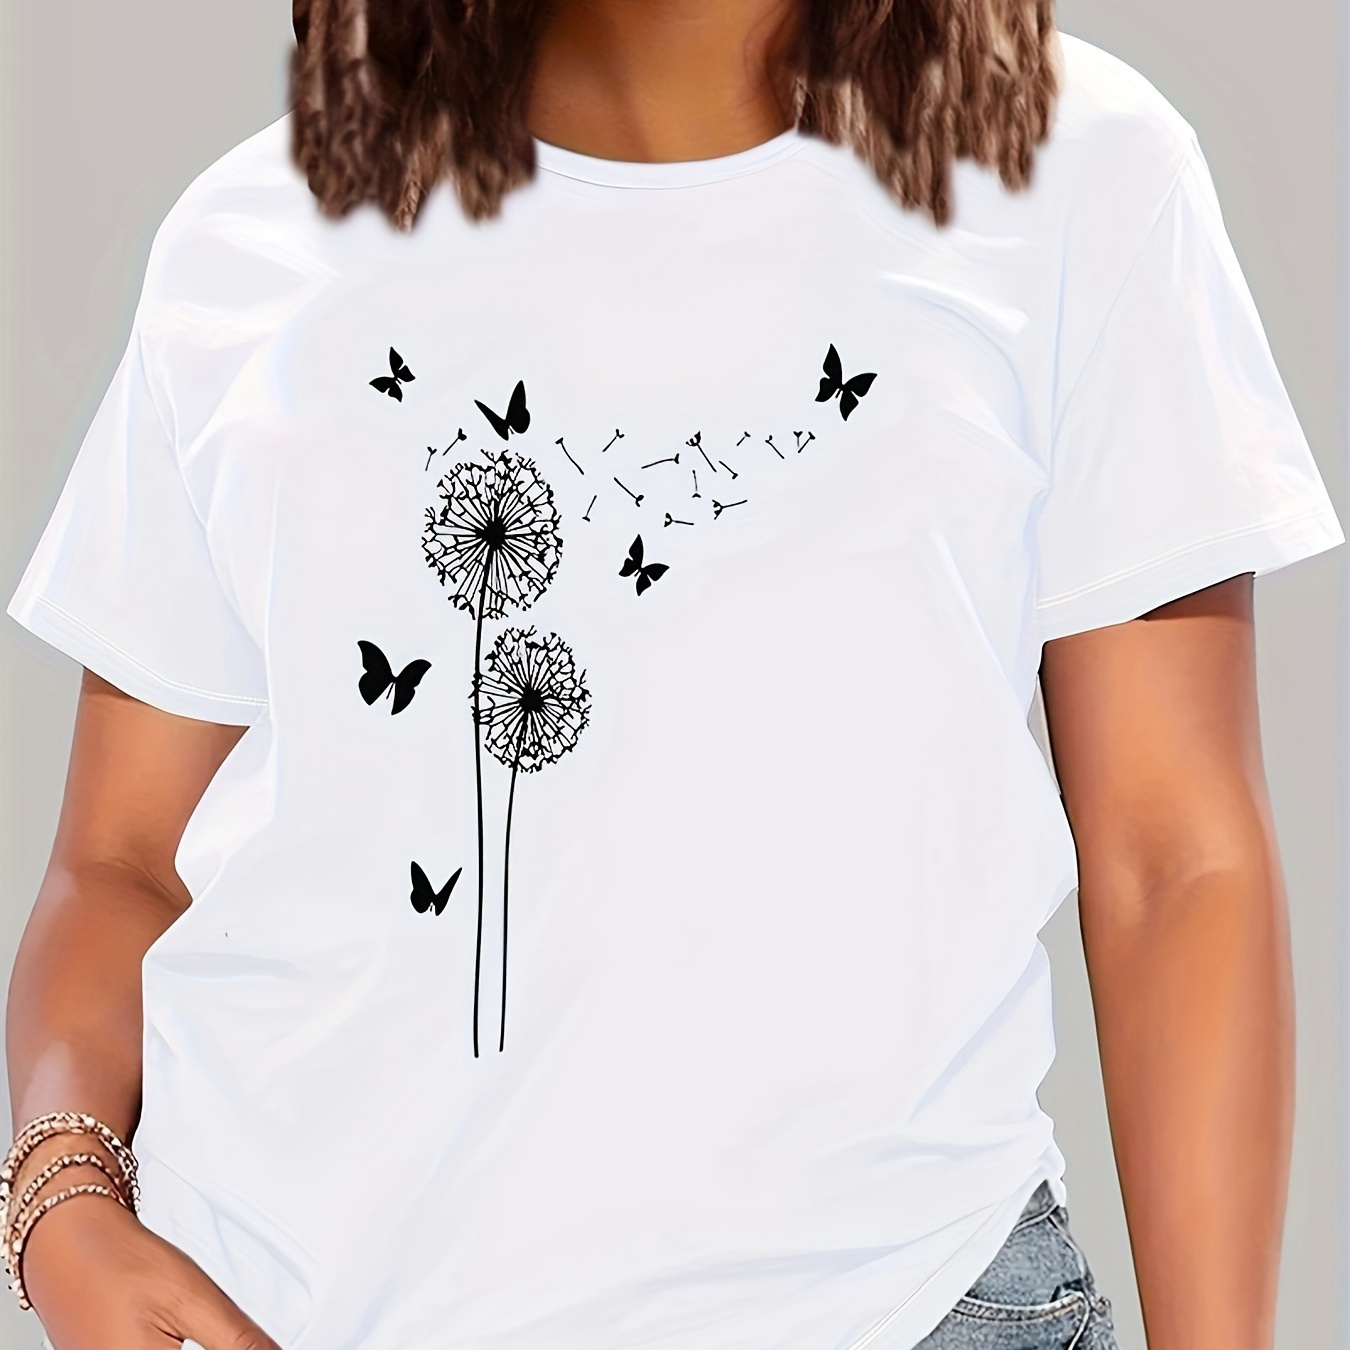 

Women's Casual Loose Fit T-shirt With Dandelion And Butterfly Print, Comfortable Home And Outdoor Tee For Sports And Social Gatherings, Versatile Styling Options